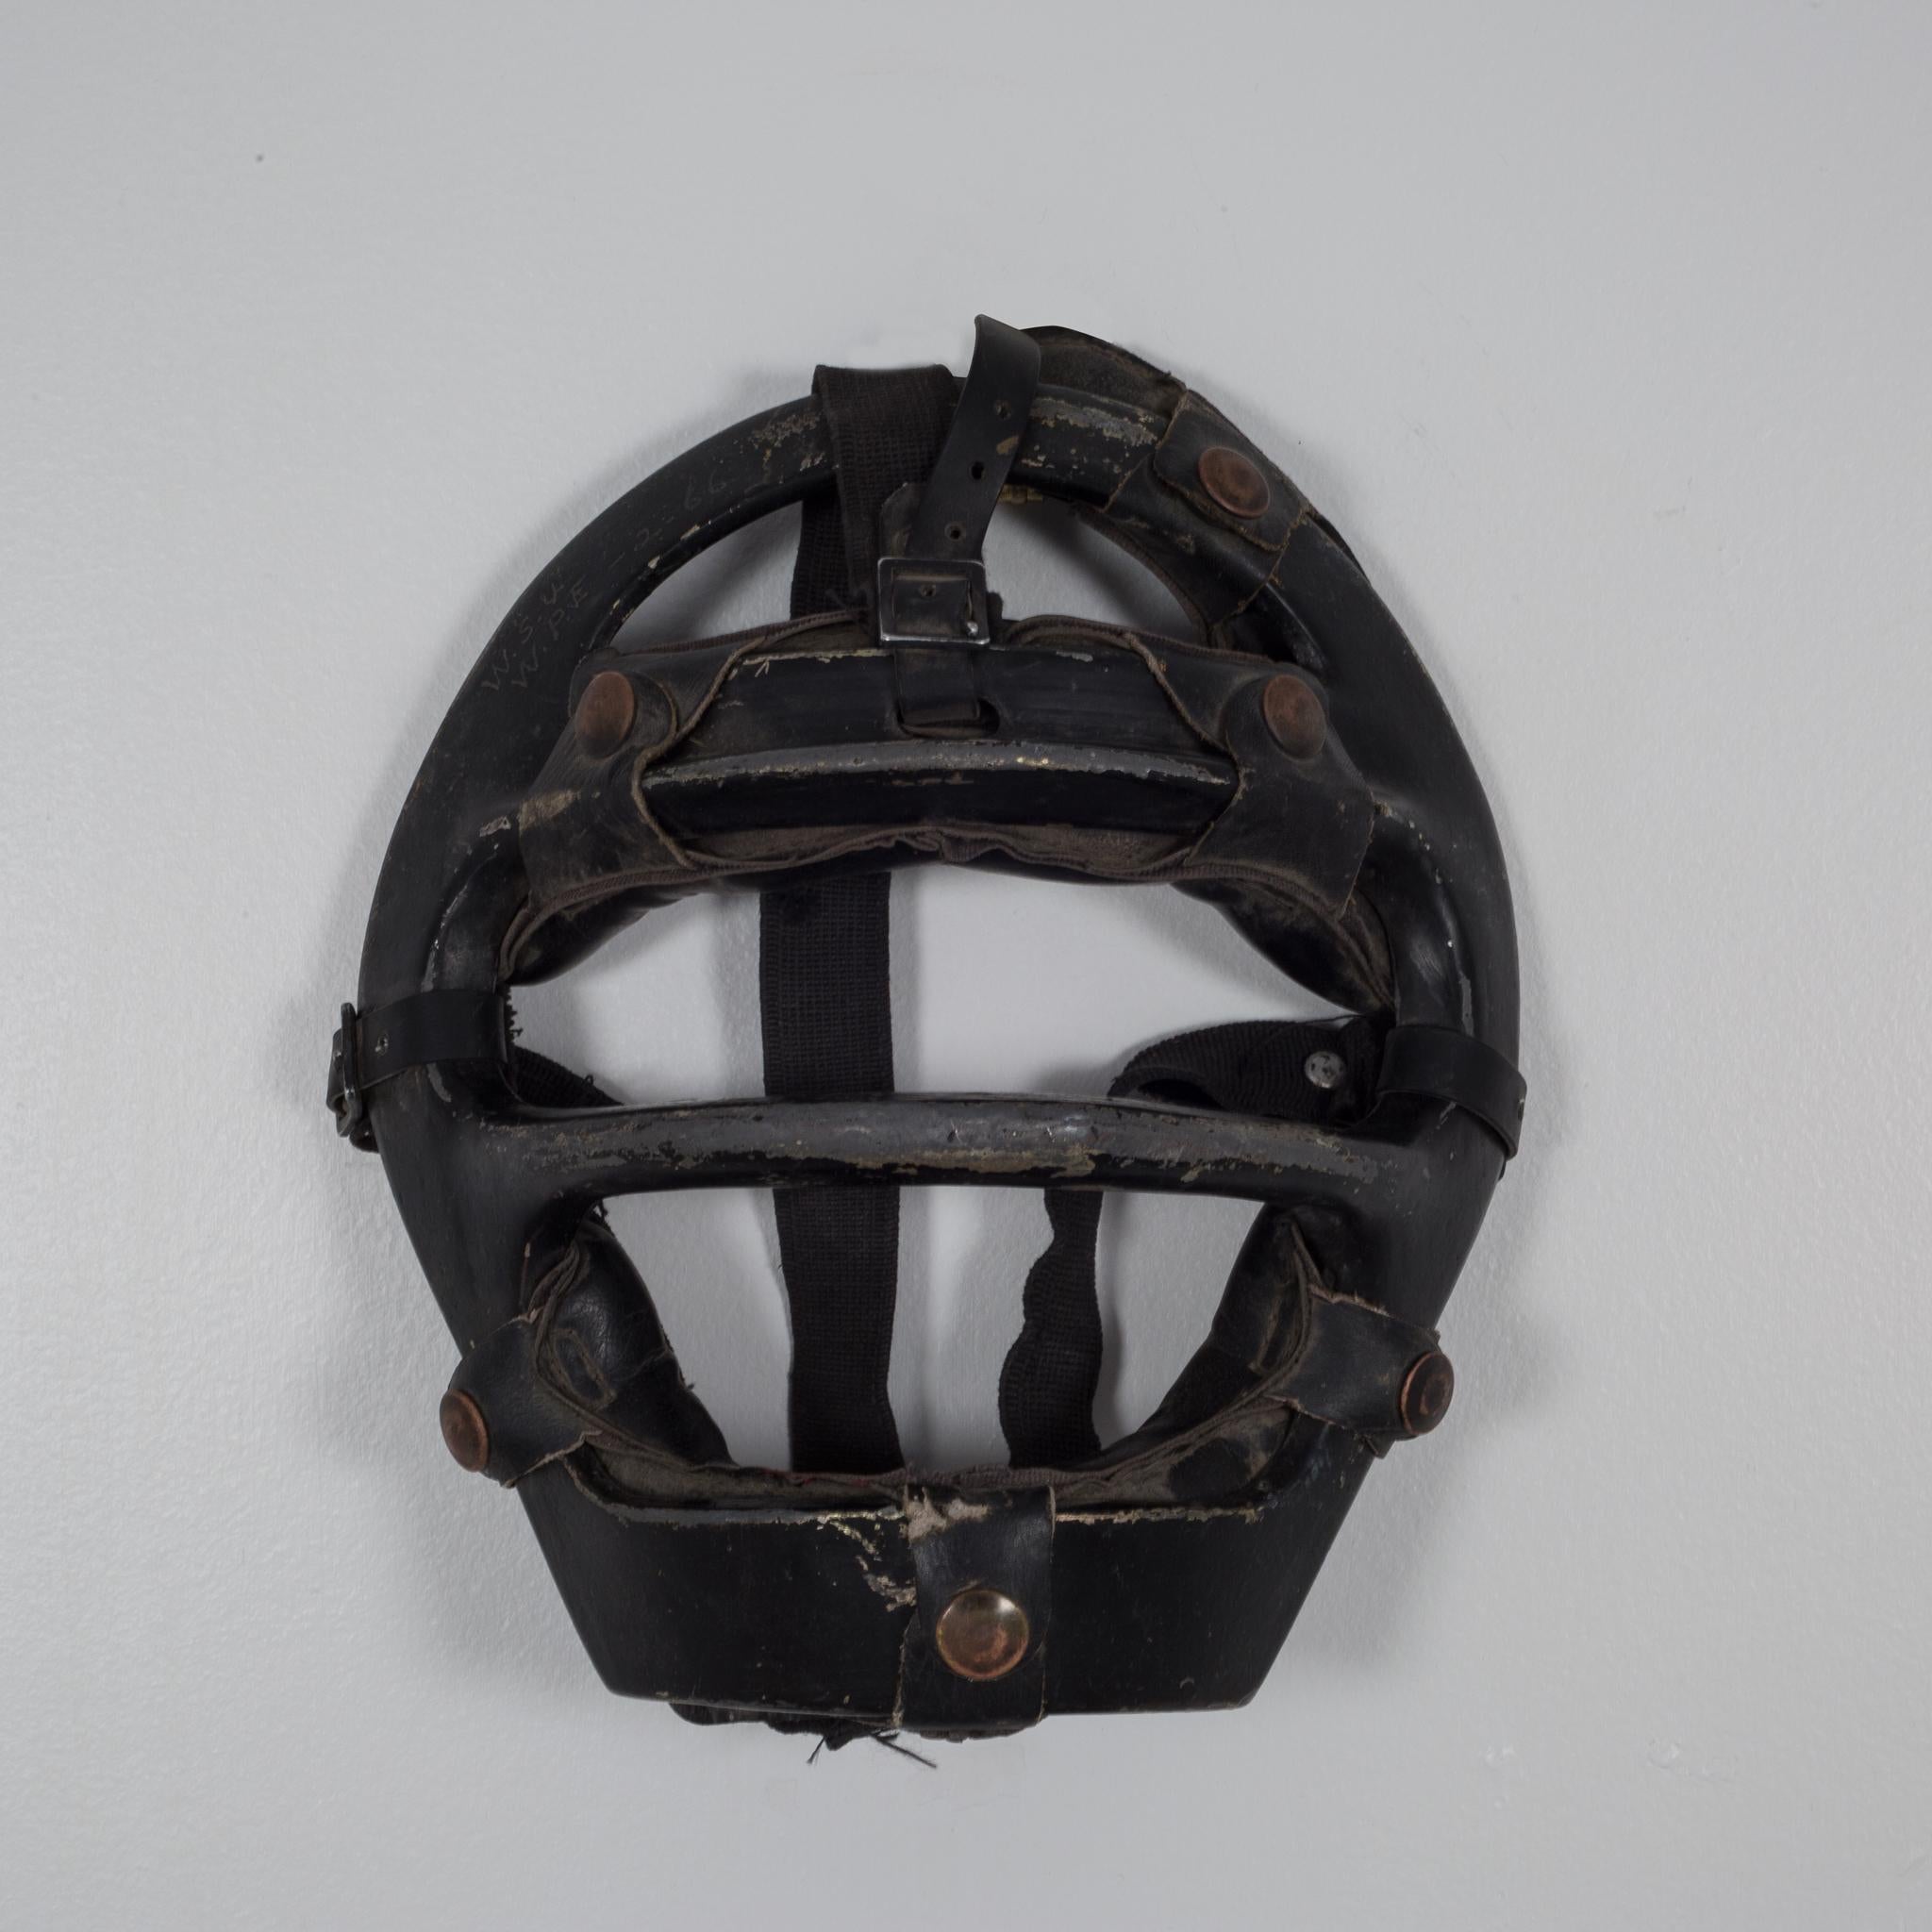 About

This is an original vintage catcher's mask. The main body is aluminum with thick, black leather padding. The padding is held onto the body of the mask by leather straps with brass snaps. There are initials and an date scratched on the upper